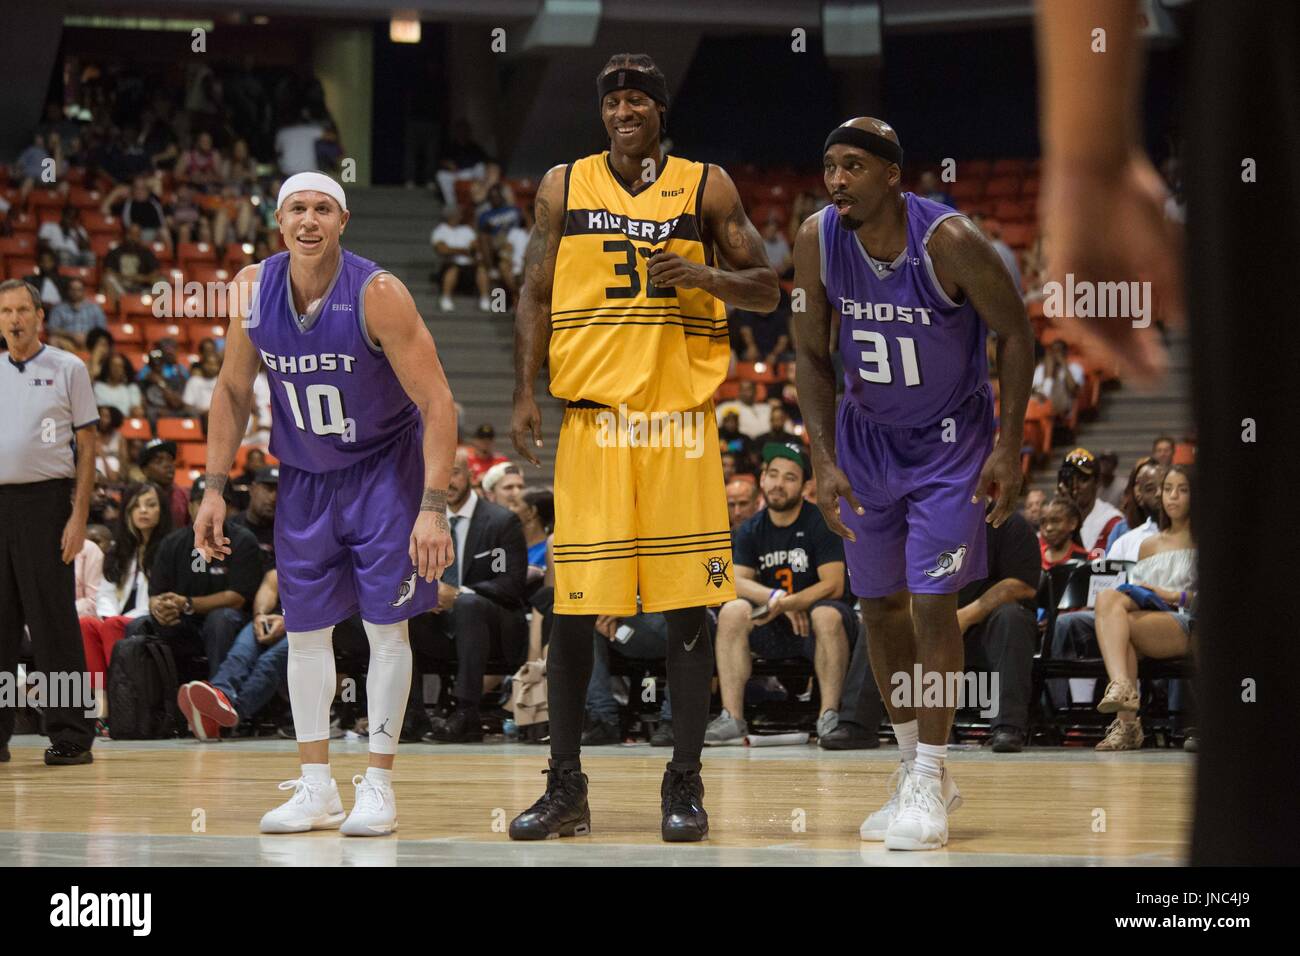 Eddie Robinson #32 Killer 3s smiles while standing between Captain Mike Bibby #10 co-captain Ricky Davis #31 Ghost Ballers along free throw line during Game #4 Big3 Week 5 3-on-3 tournament UIC Pavilion July 23,2017 Chicago,Illinois. Stock Photo